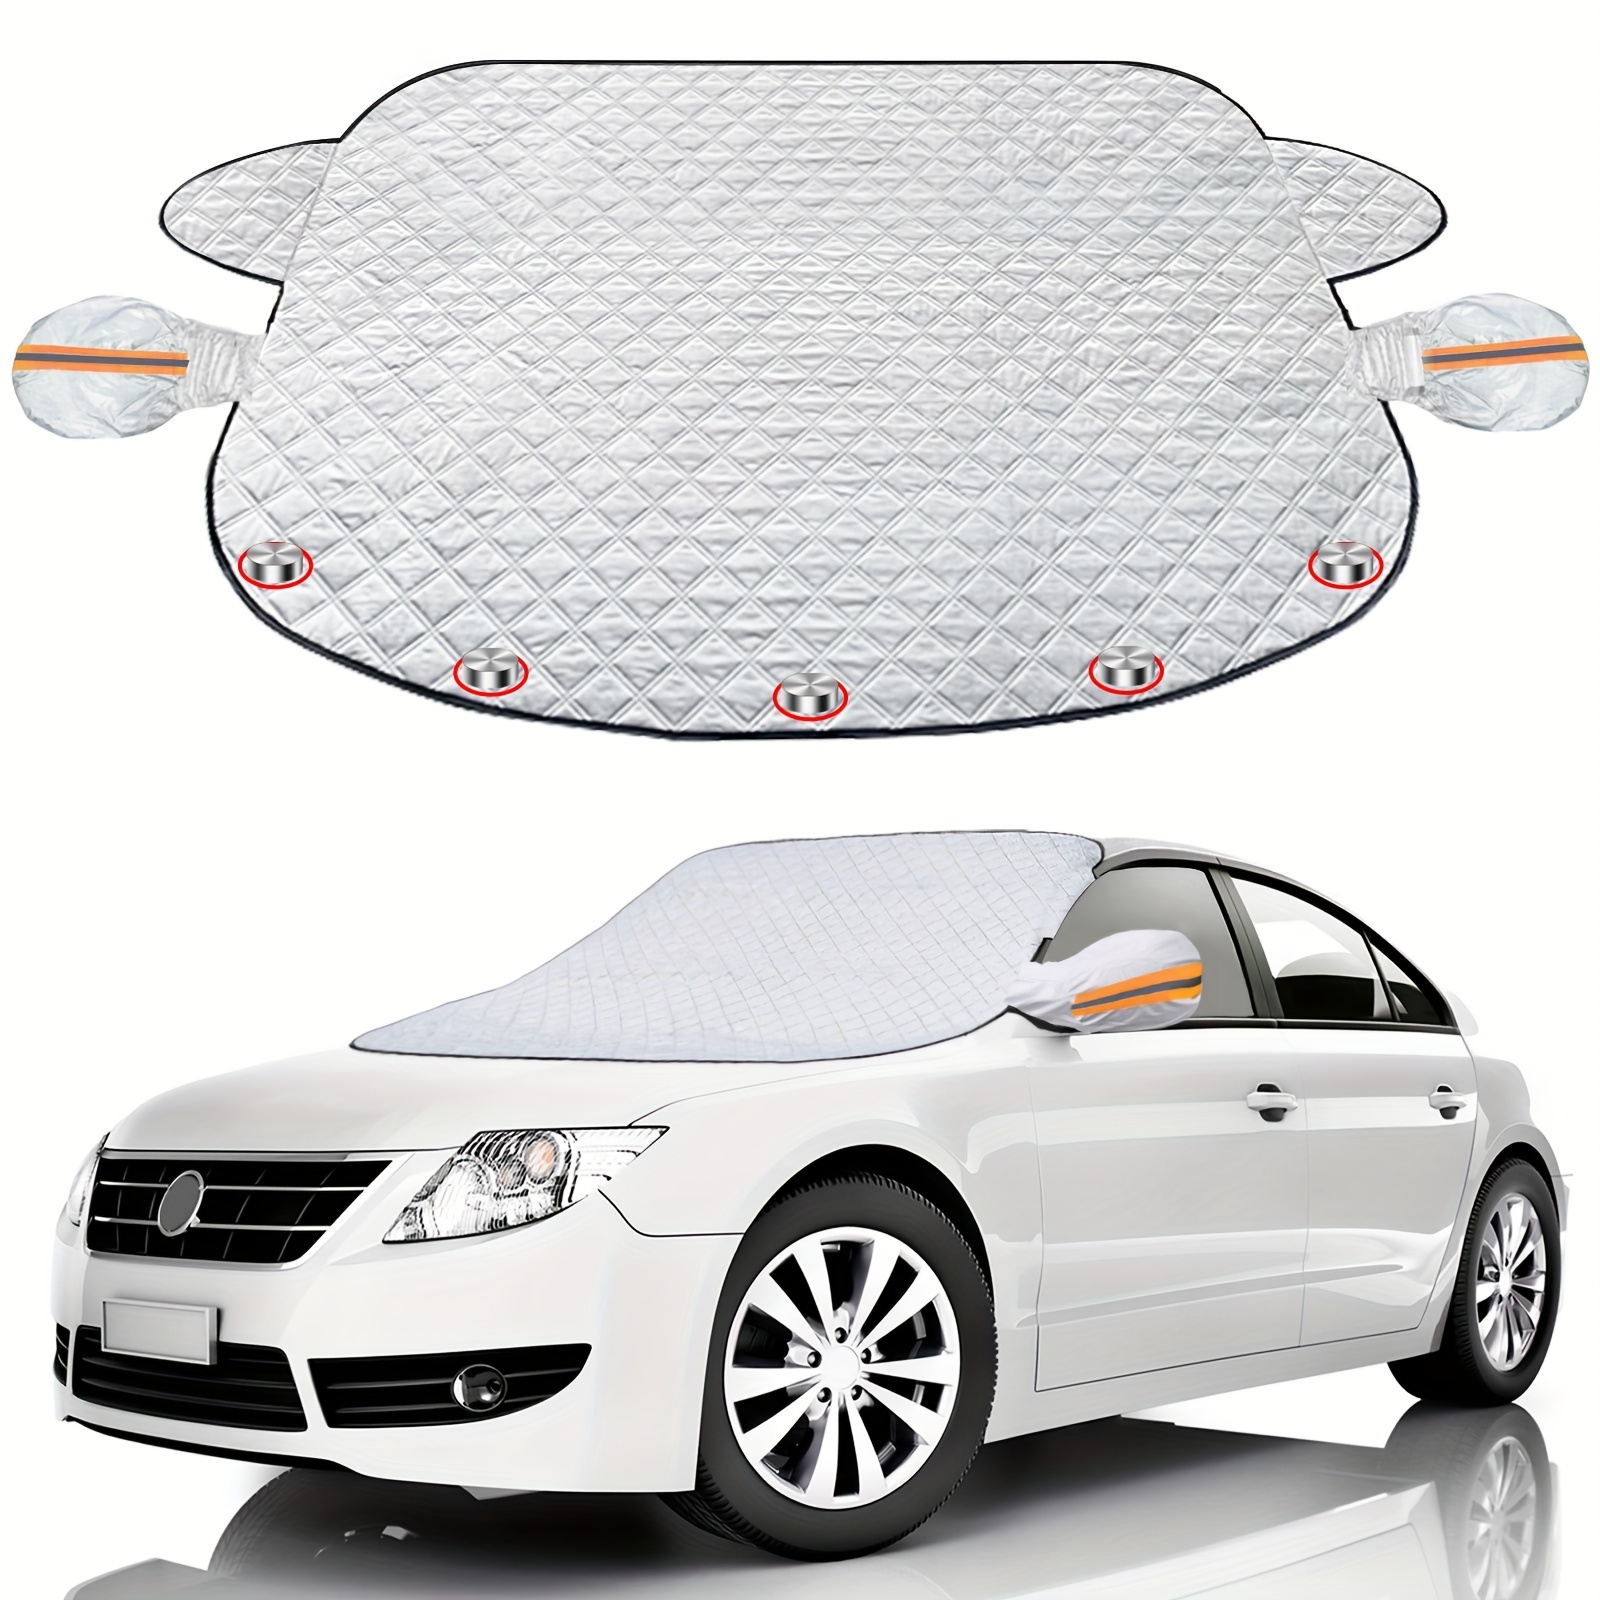 Car Windshield Cover for Ice and Snow,Car Snow Cover,Winter Frost